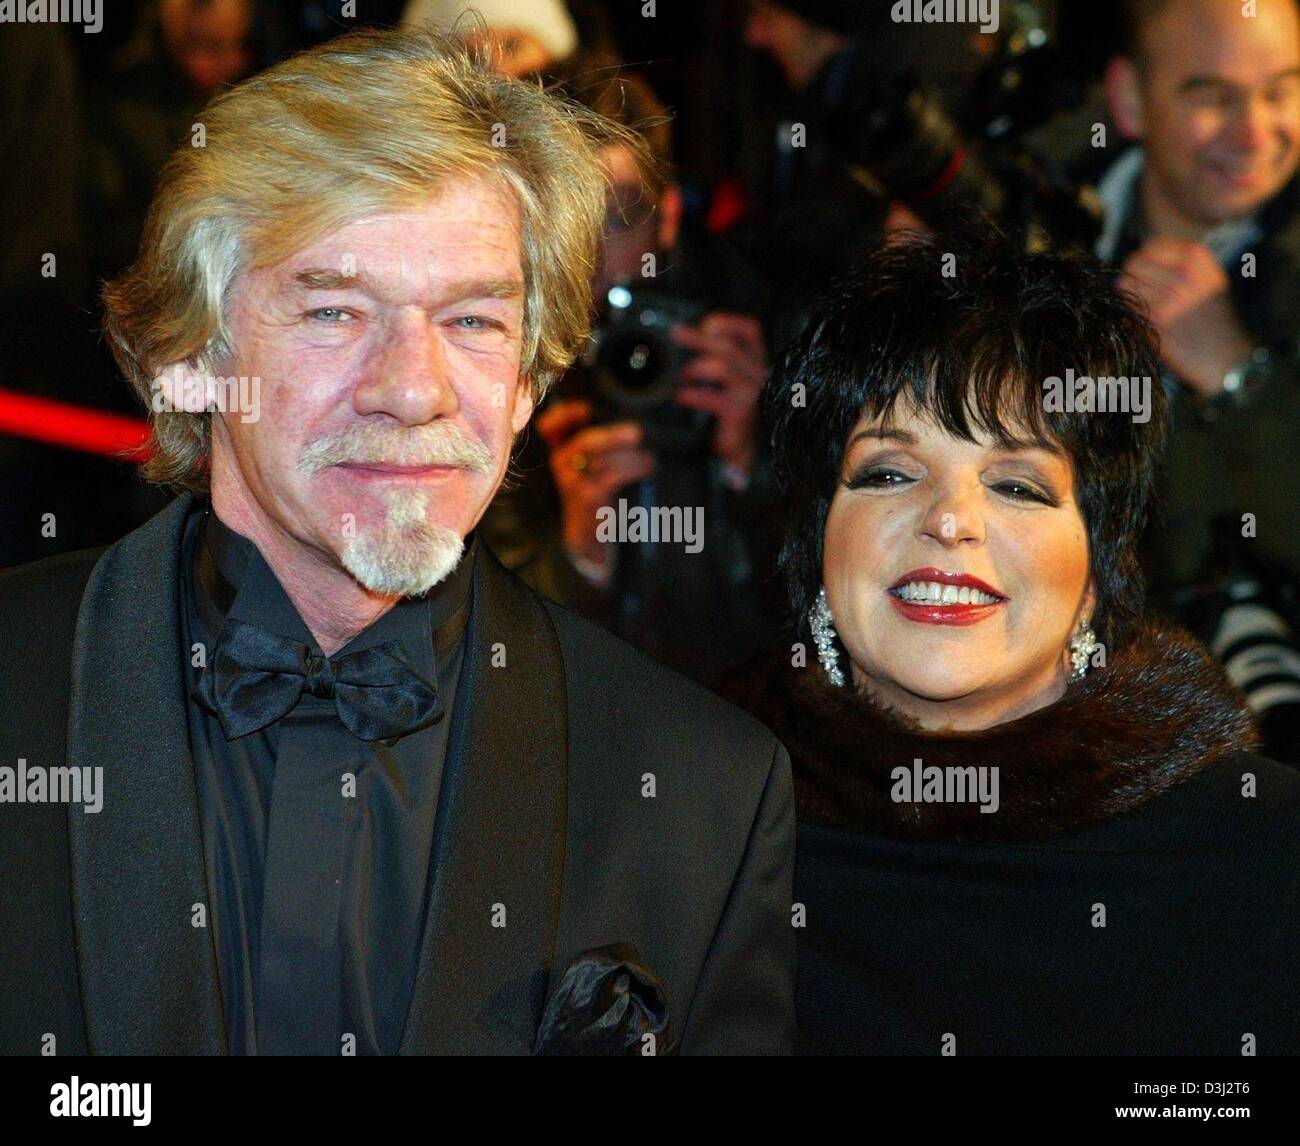 Entertainer Liza Minelli and French music producer Pierre Biolon arrive to the 'Cinema for Peace' charity gala in Berlin, 9 February 2004. The proceeds of the gala, which was held on the sidelines of the Berlinale Film Festival, will go to UNICEF and Aids research institutions. Stock Photo